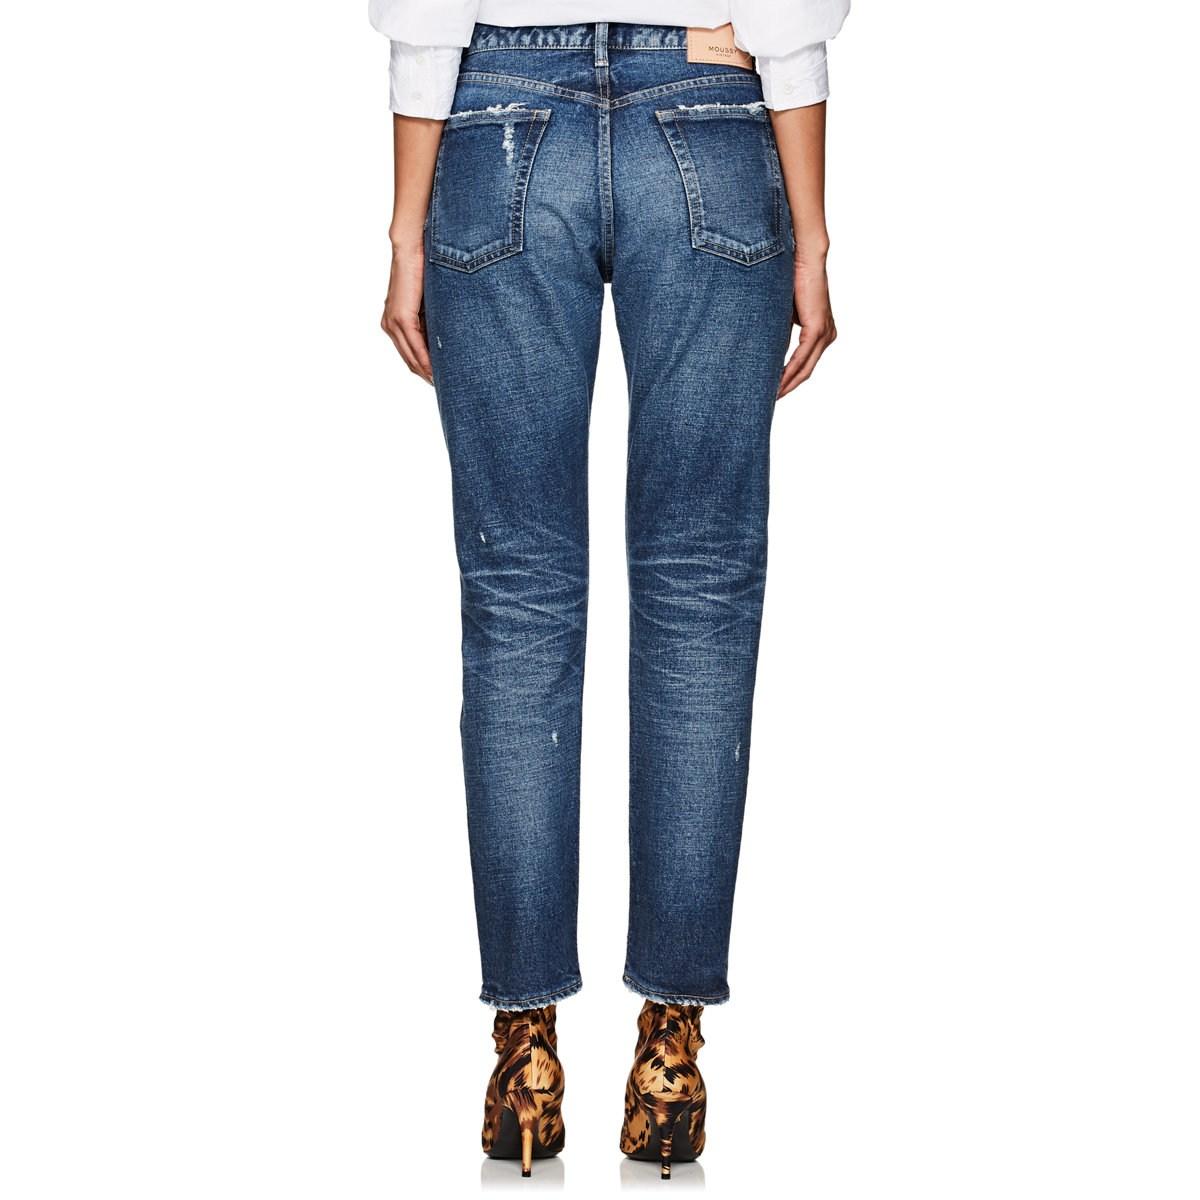 Moussy Denim High-rise Tapered Skinny Jeans in Blue - Lyst